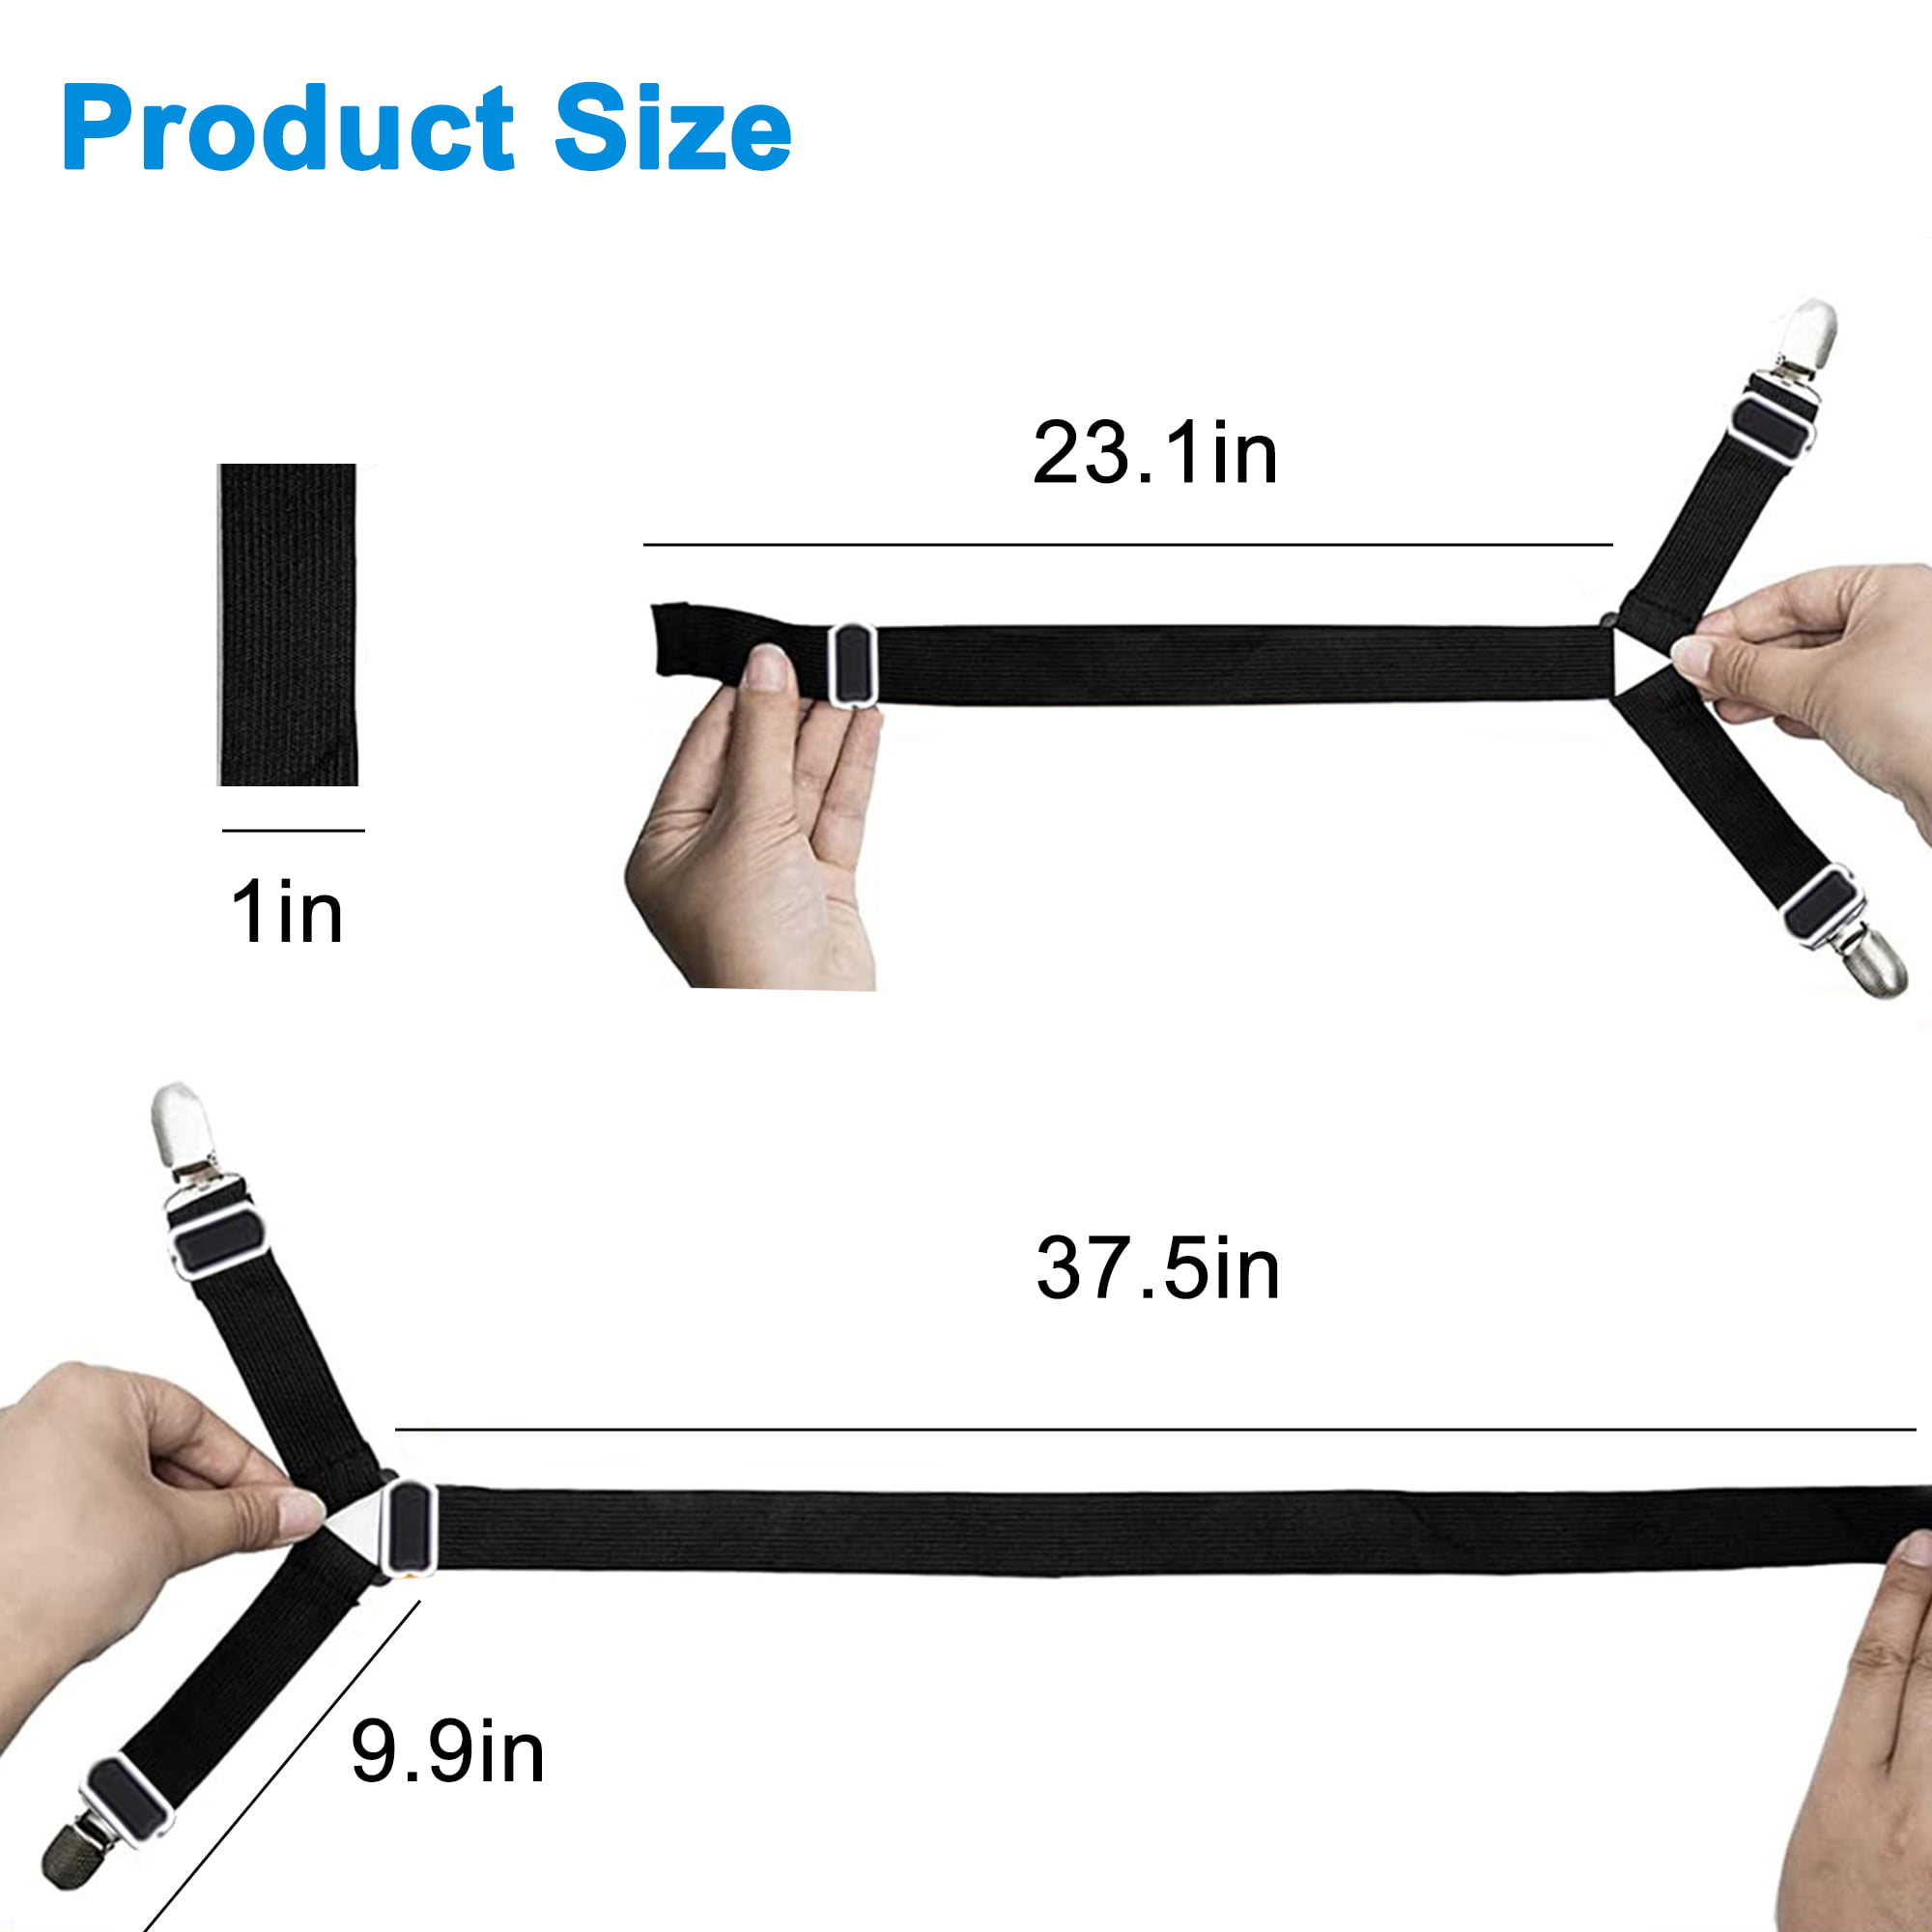 FeelAtHome Bed Sheet Holder Straps Criss-Cross - Sheets Stays Suspenders  Keeping Fitted Or Flat Bedsheet in Place - for Twin Queen King Mattress